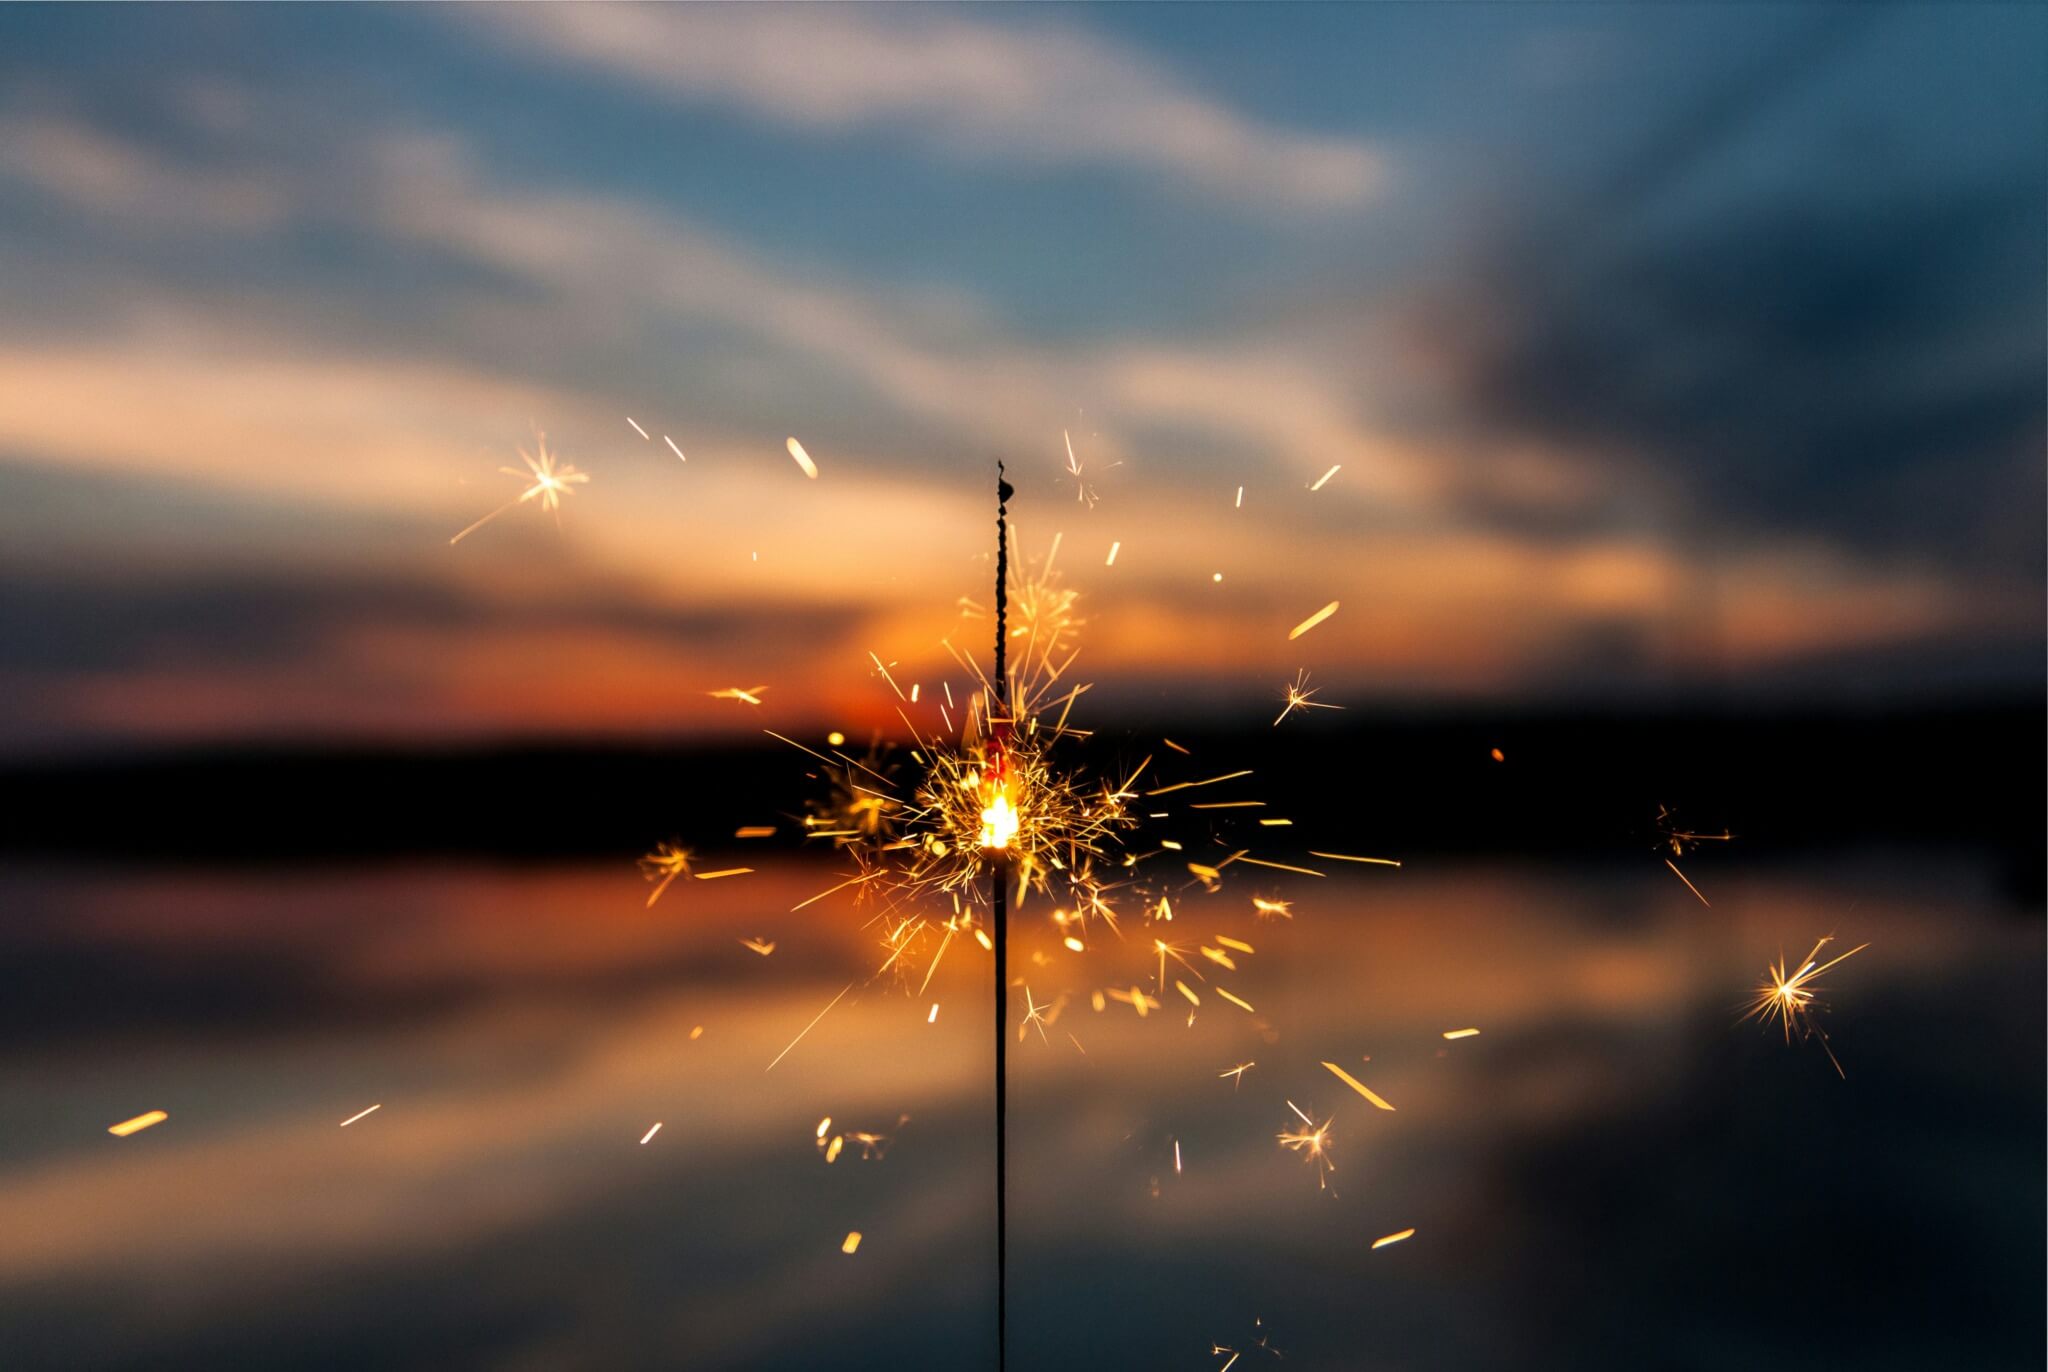 A sparkler burning a sunset in the background